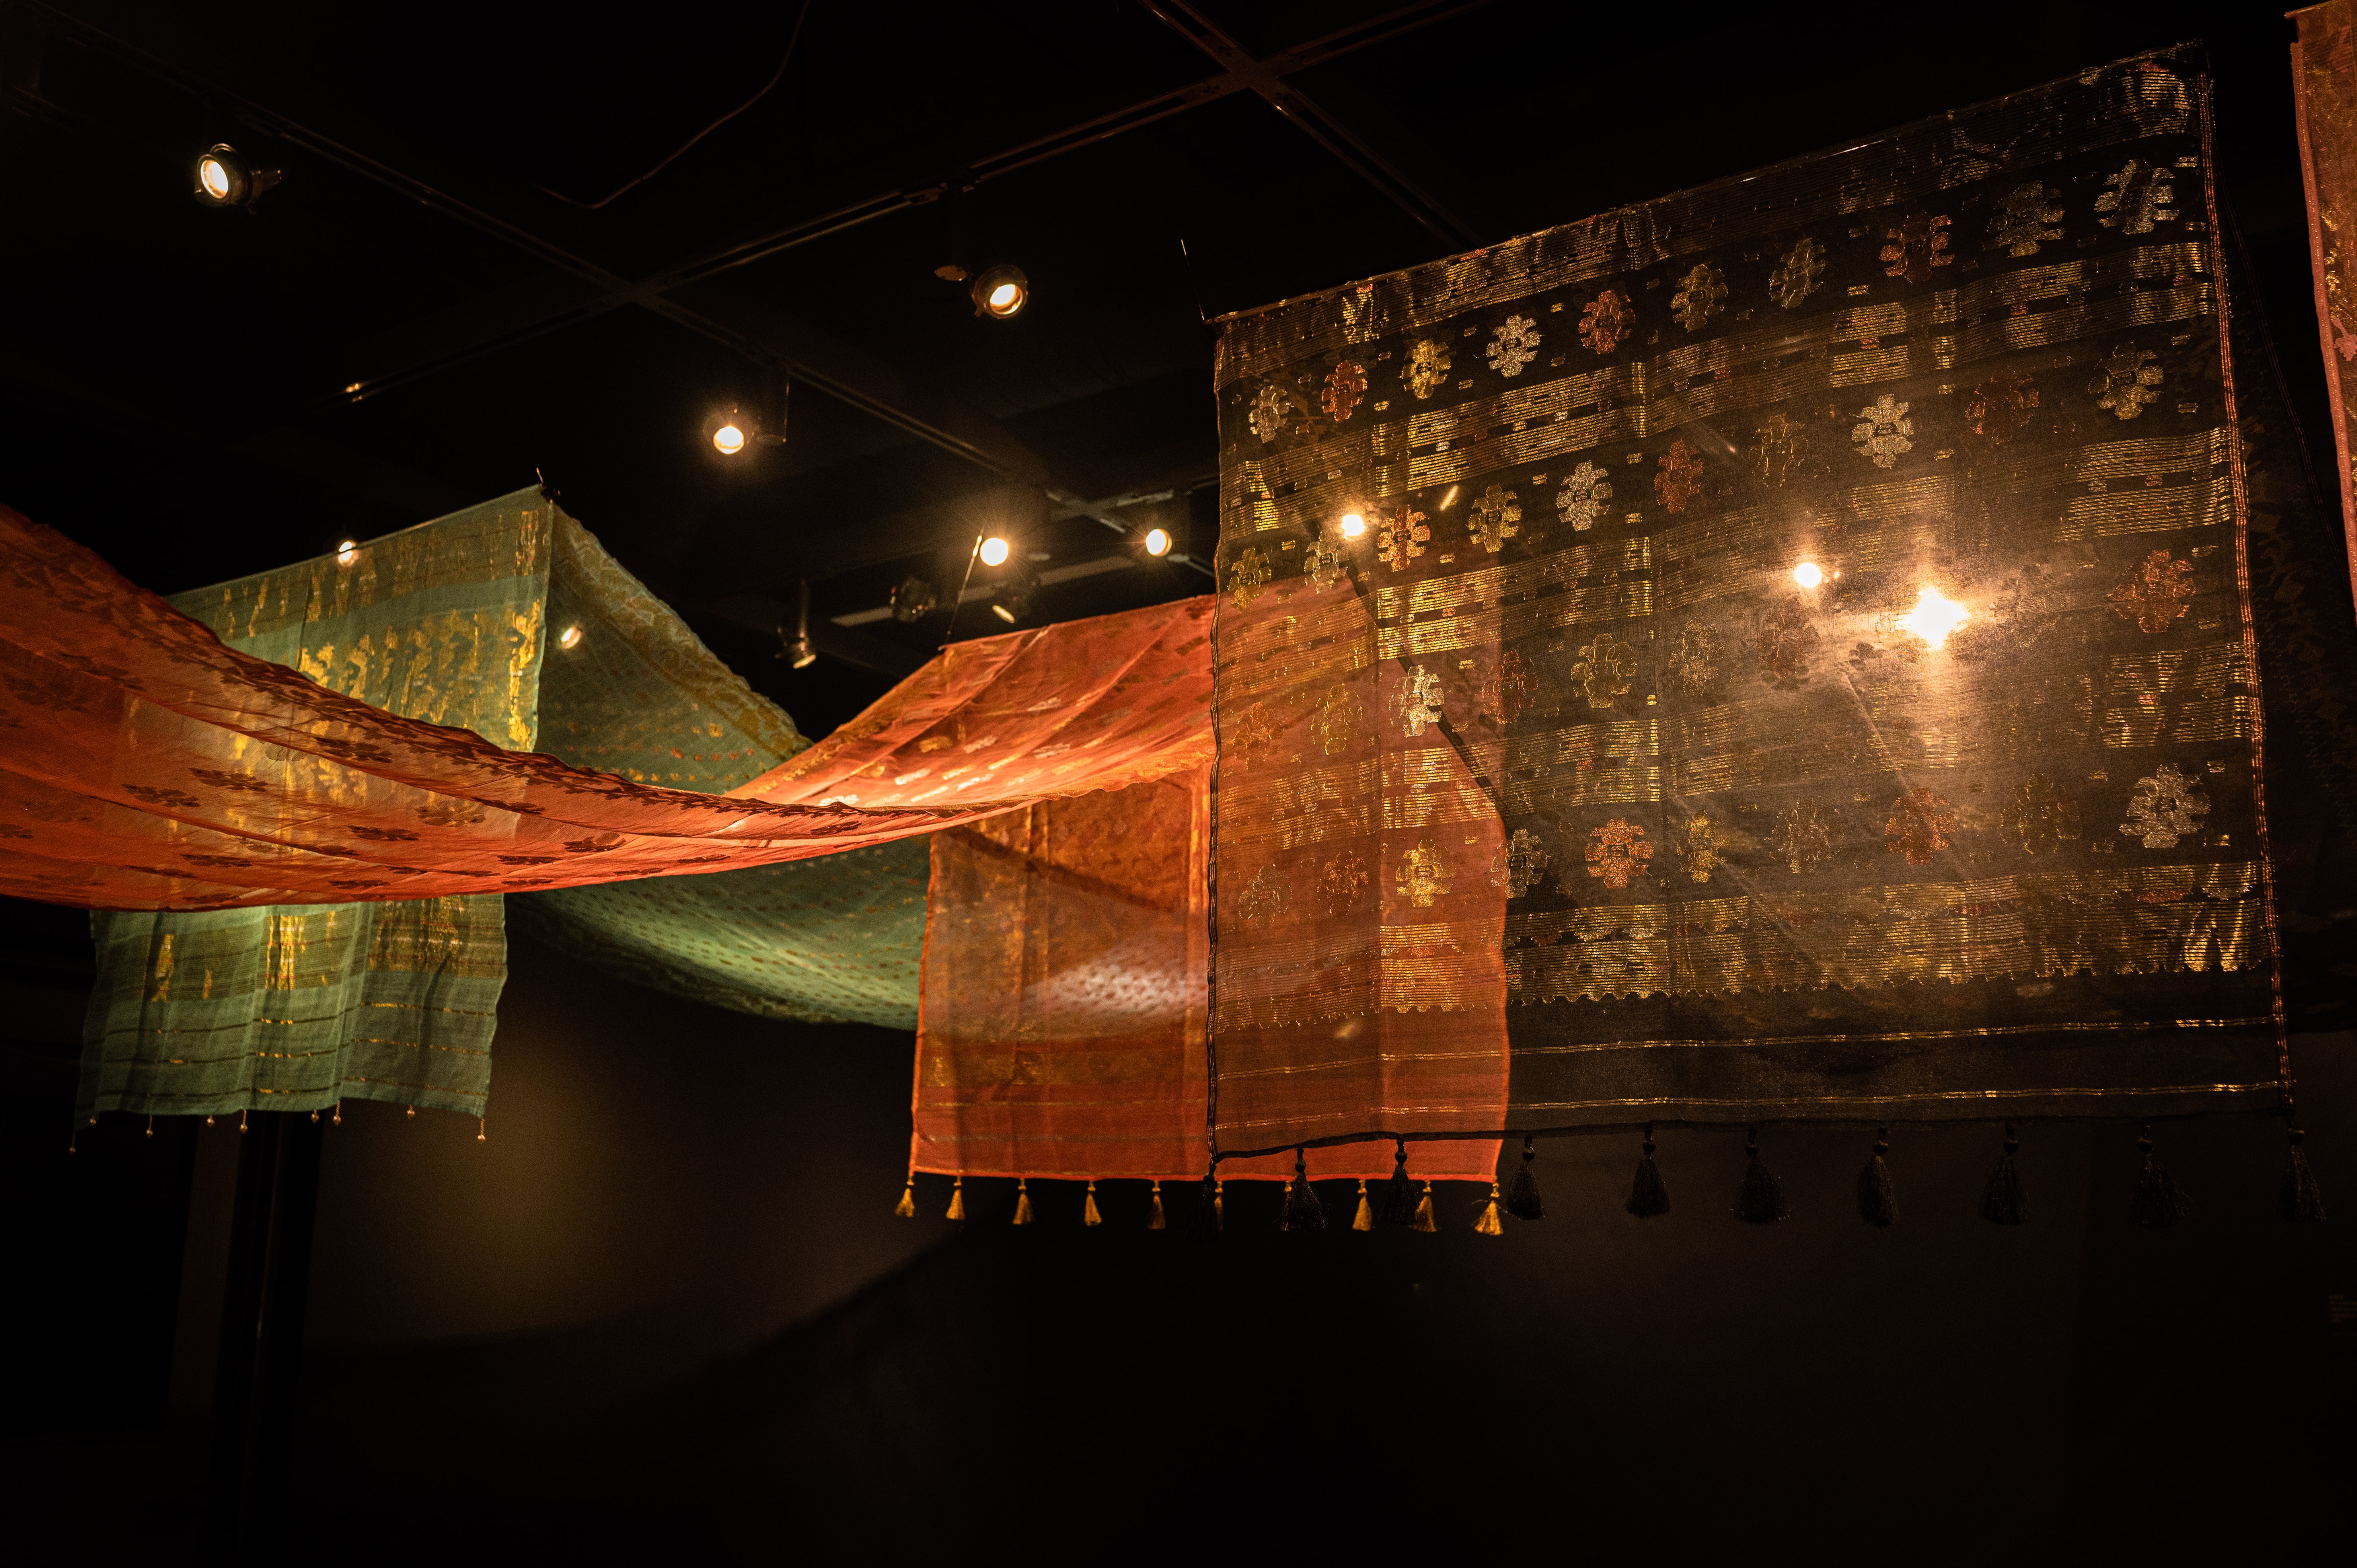 Three Jamdanis, blue, pink, and black are strung along the ceiling against a black background. Each fabric contains gold patterns and light shines through the black Jamdani.